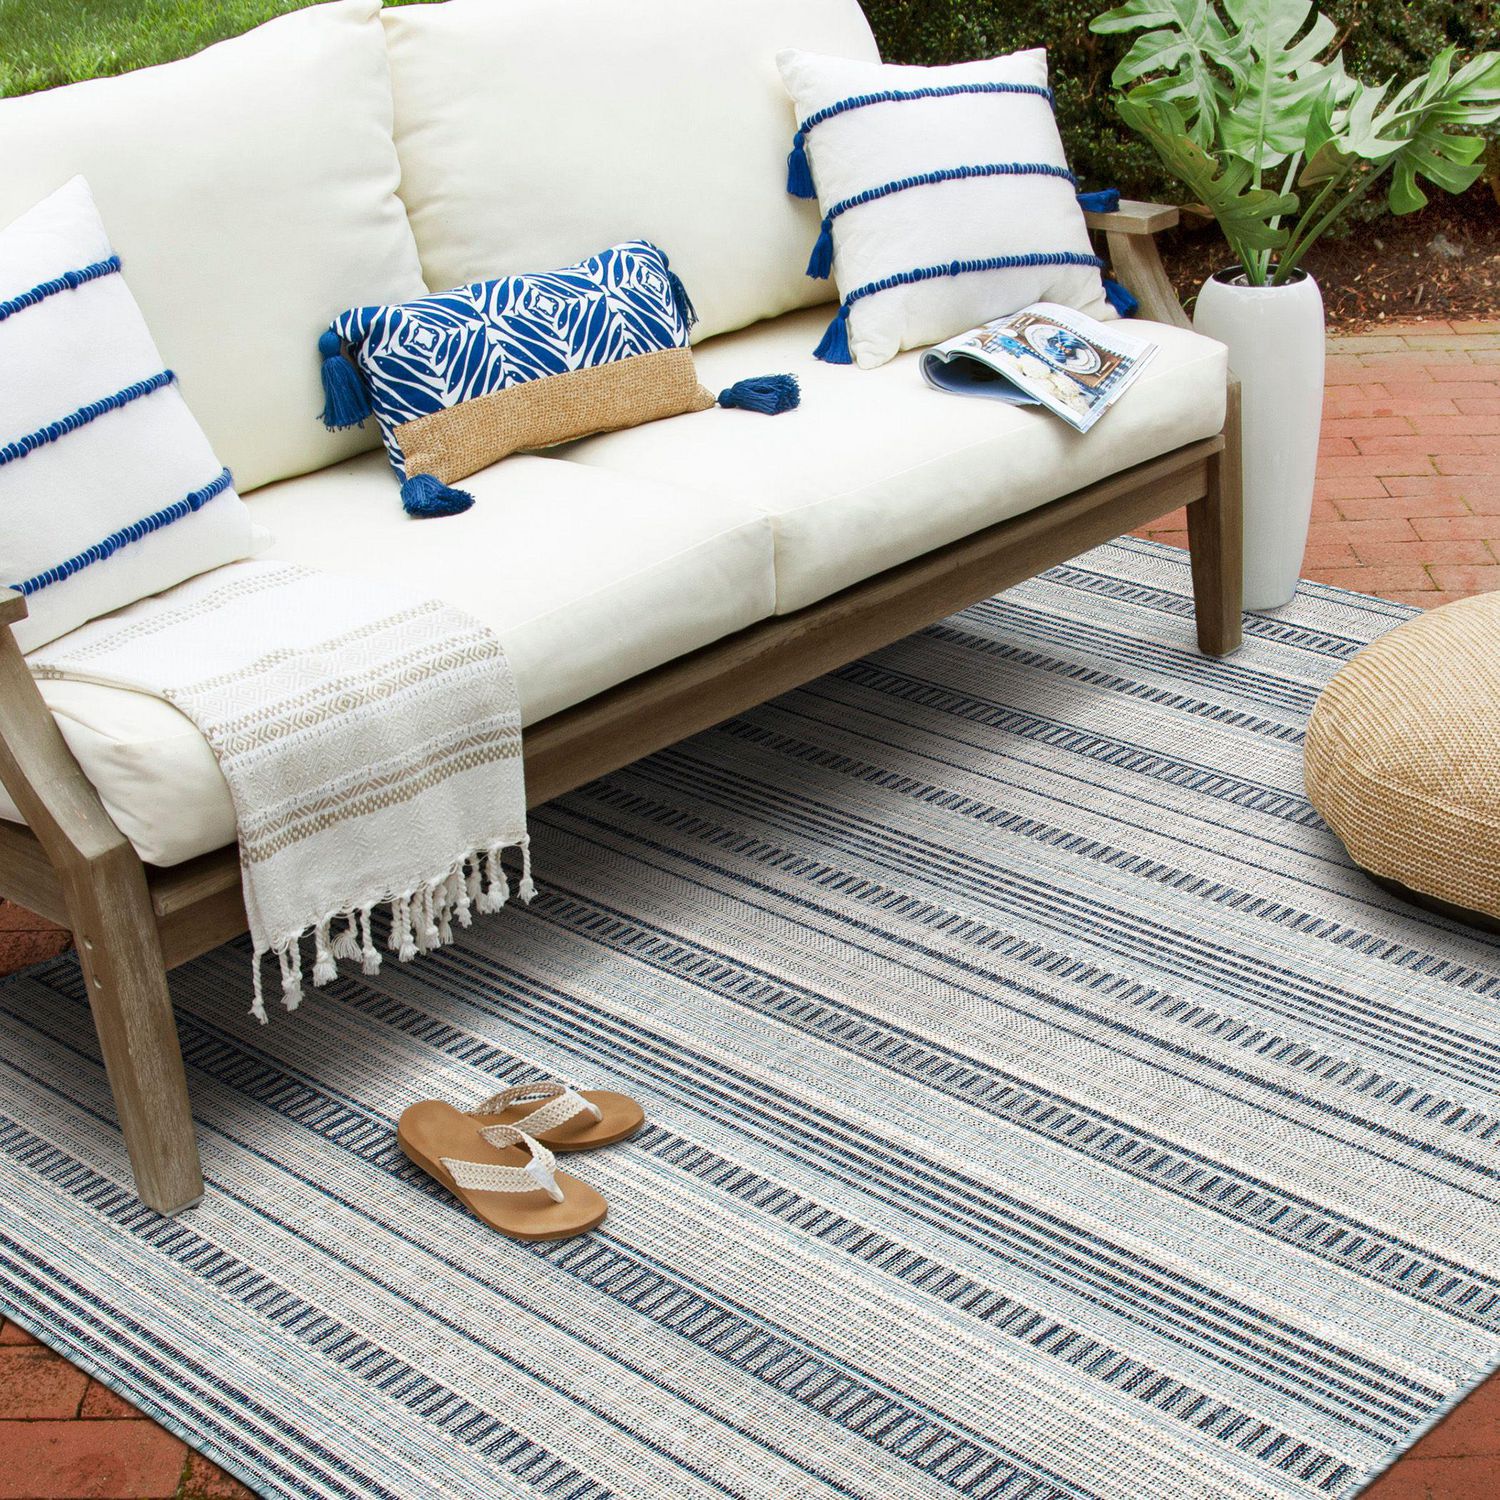 Hayweld Vanilla White And Blue Woven, Coordinating Outdoor Rugs And Pillows